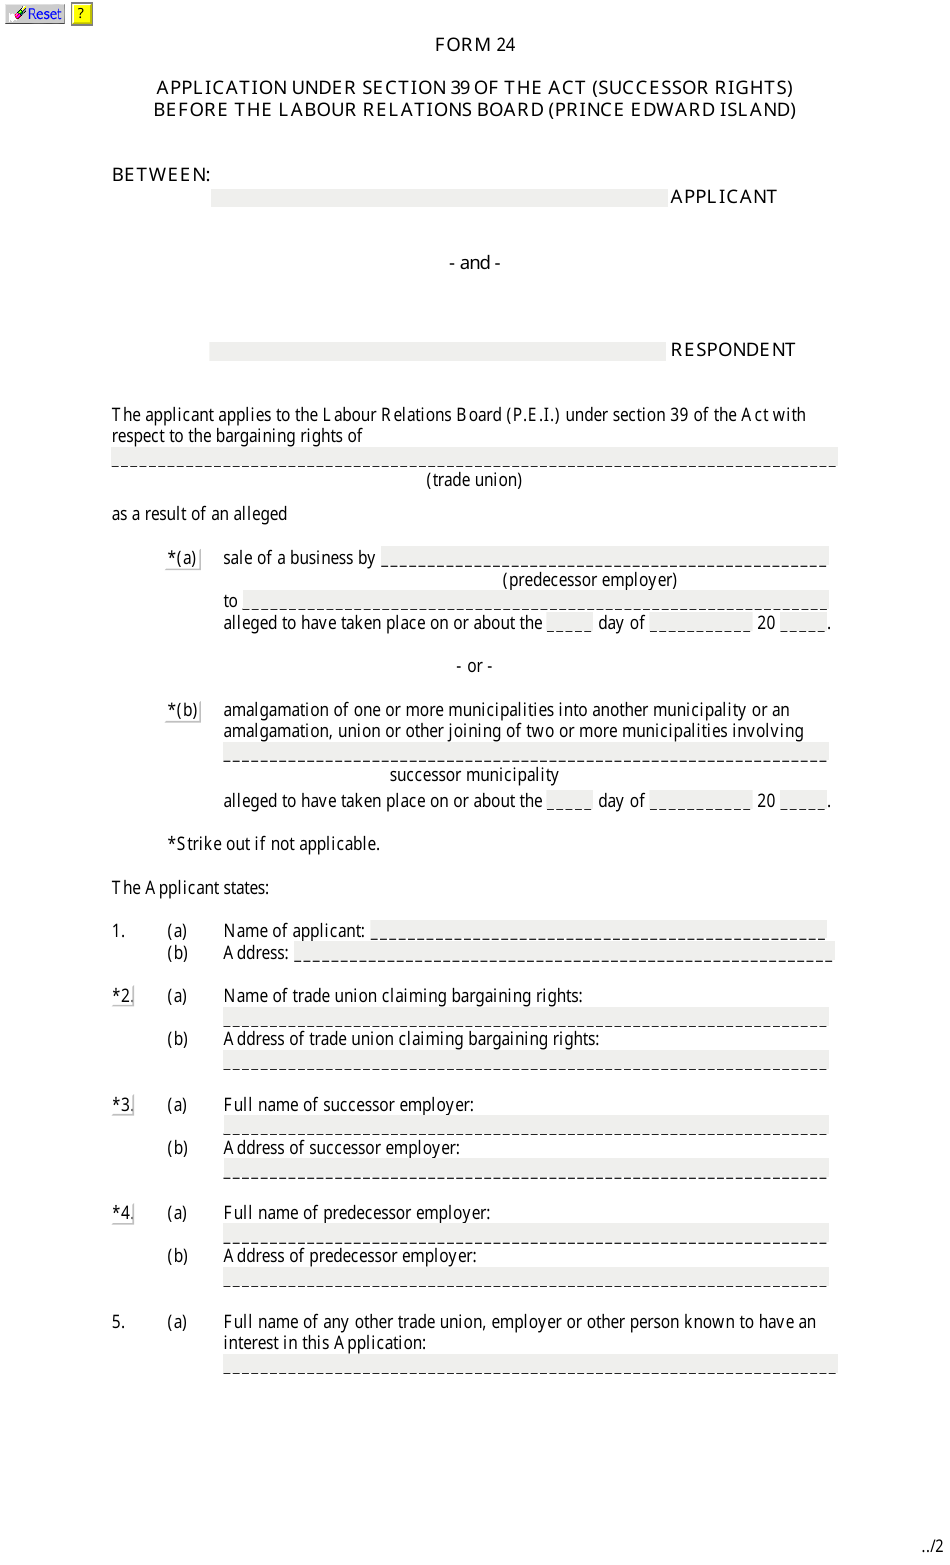 Form 24 Application for Successor Rights Under Section 39 of the Act - Prince Edward Island, Canada, Page 1